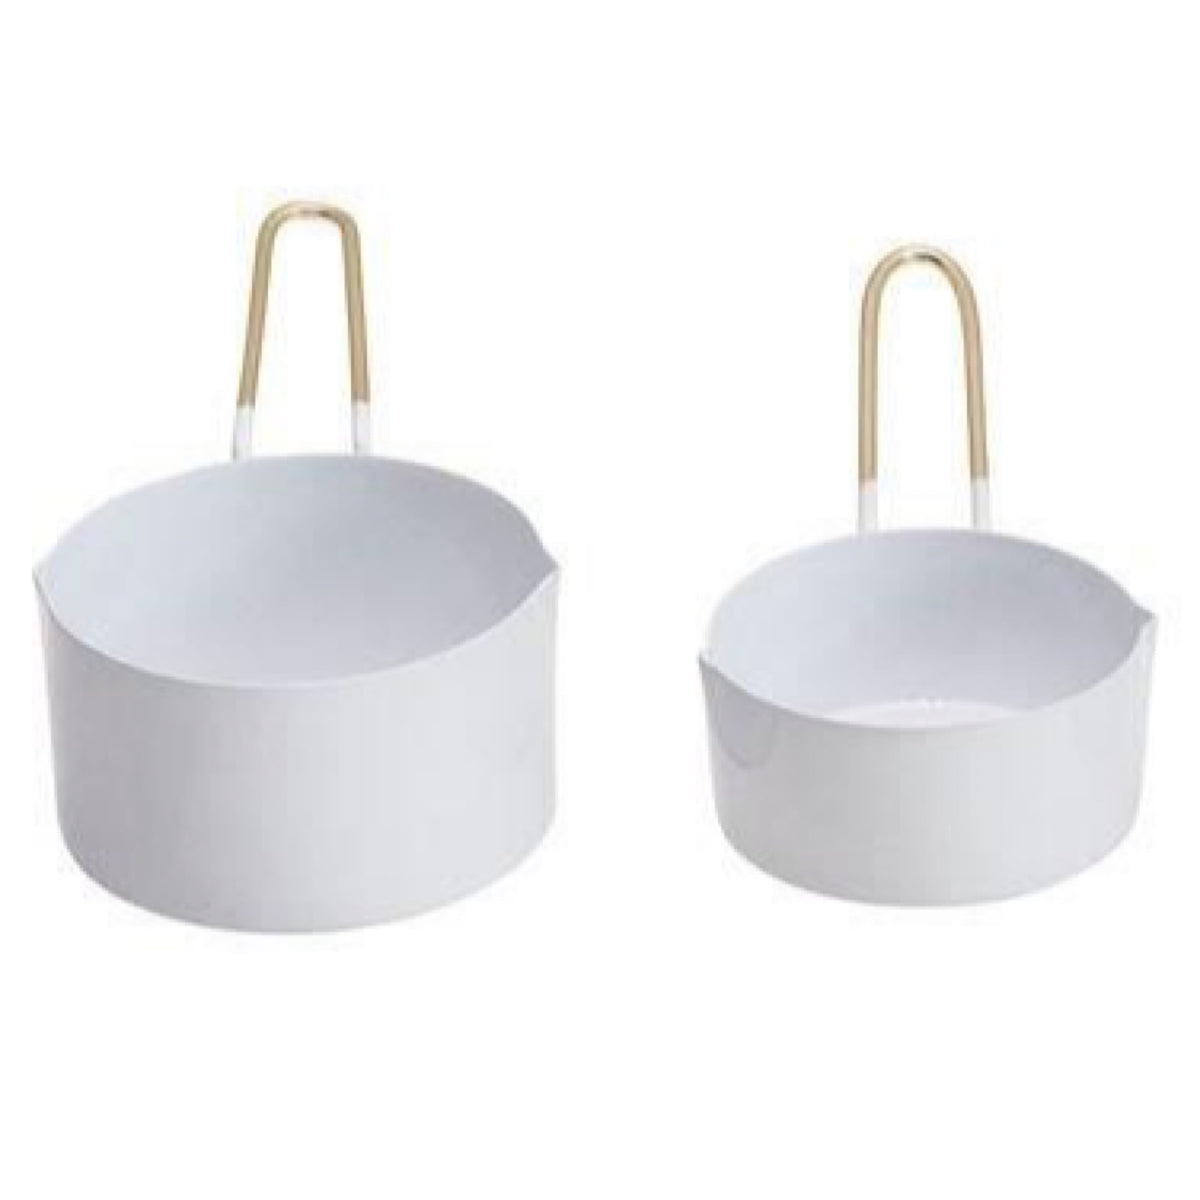 Enamelled Measuring Cups in White